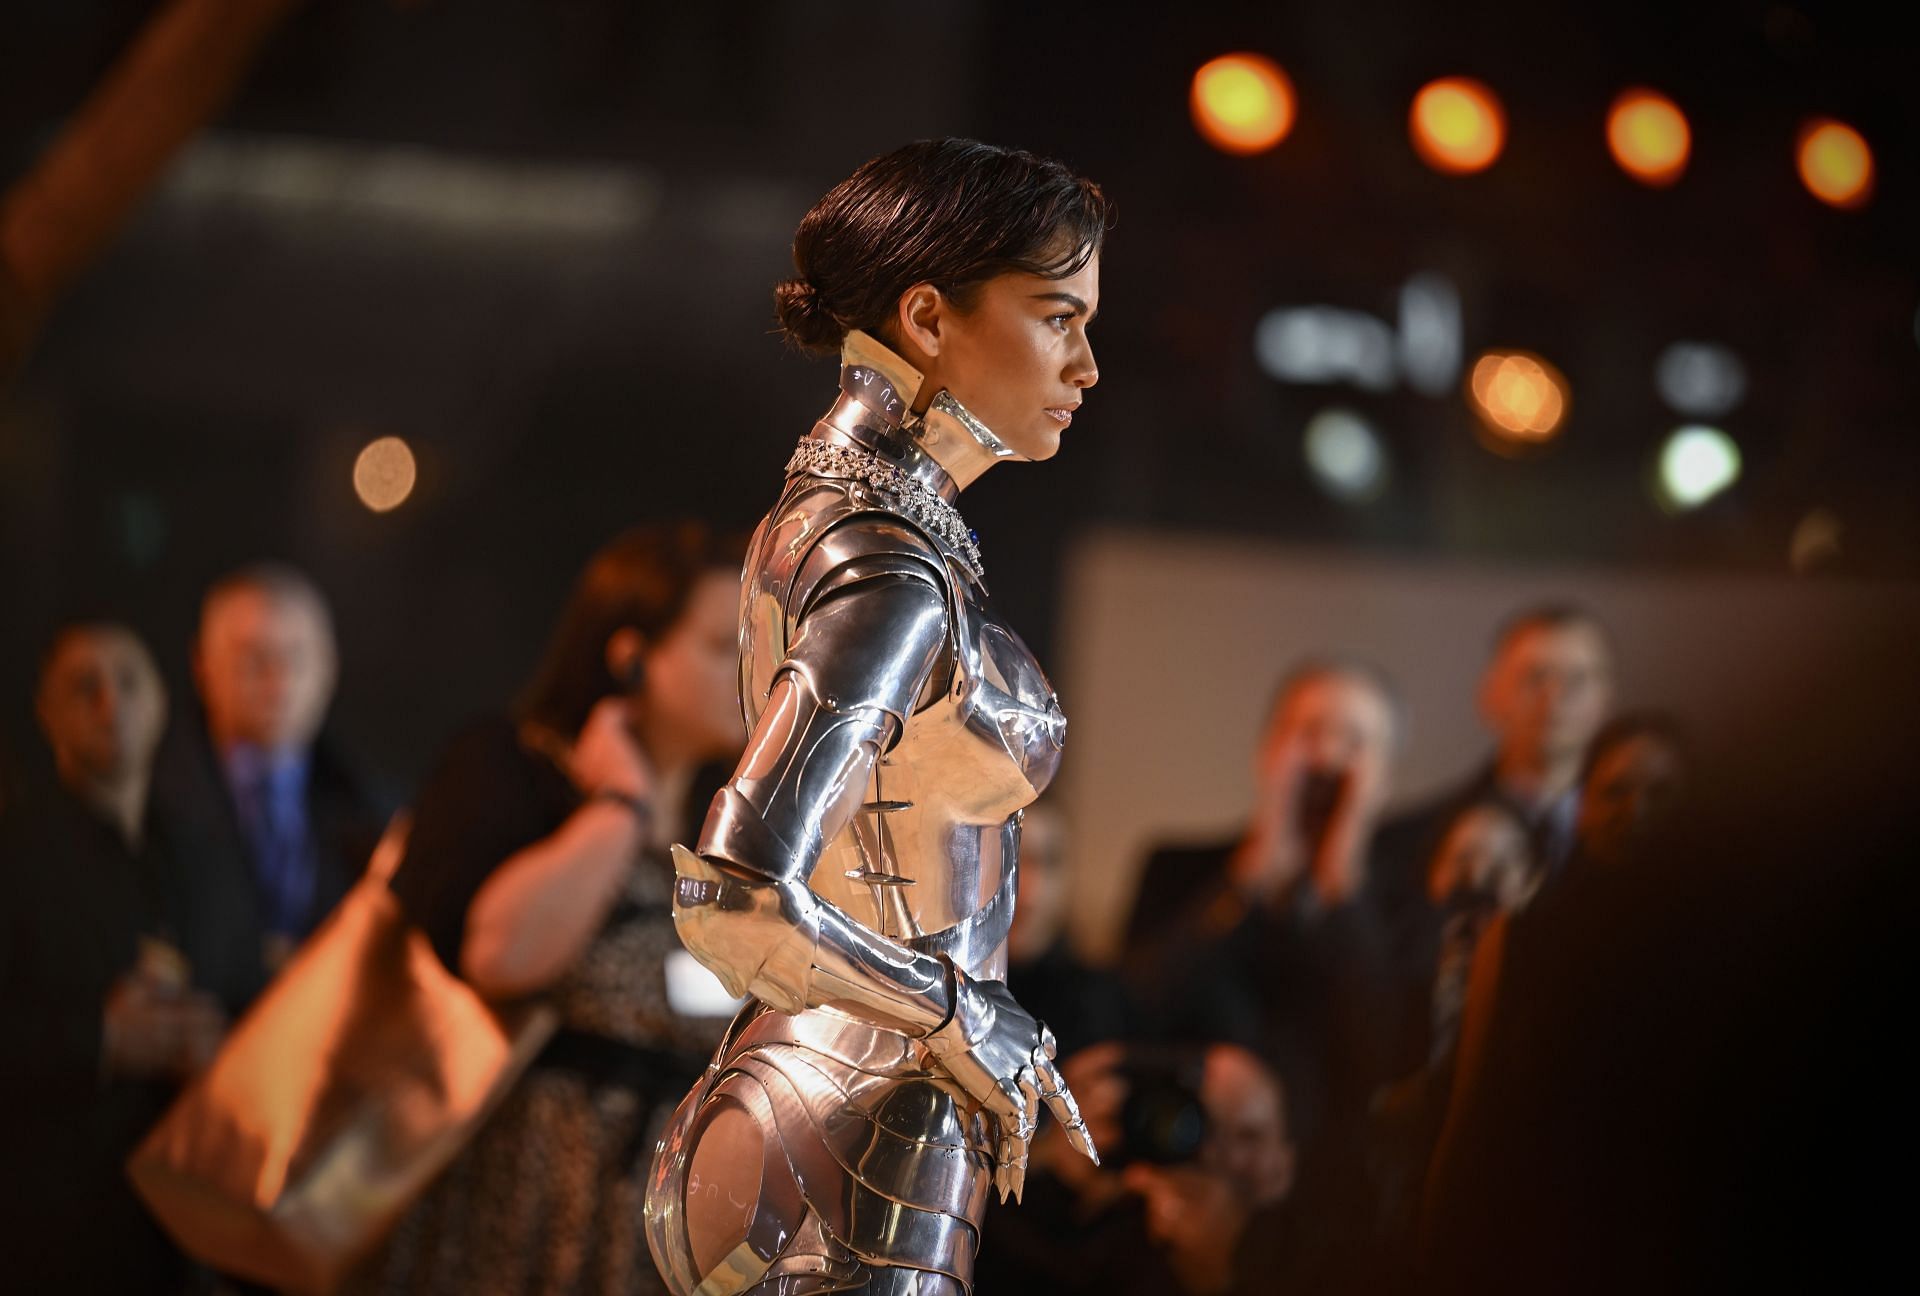 A fashion icon: Fans go gaga over Zendaya's Thierry Mugler couture robot  suit at the Dune 2 premiere